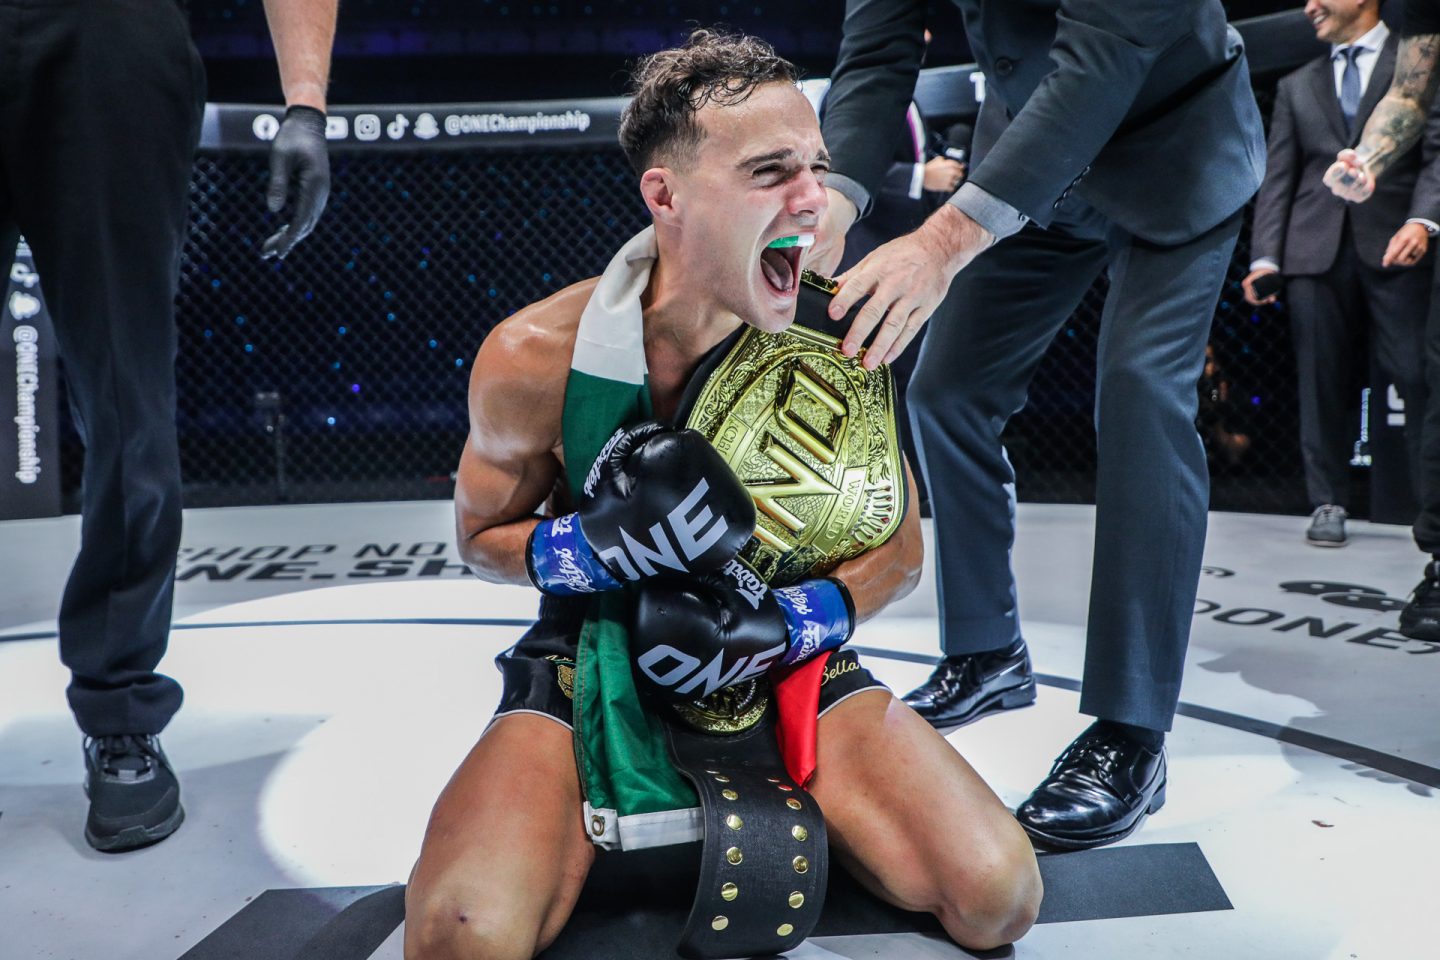 Jonathan Di Bella Wins ONE Strawweight Kickboxing World Title In Epic Clash With Zhang Peimian